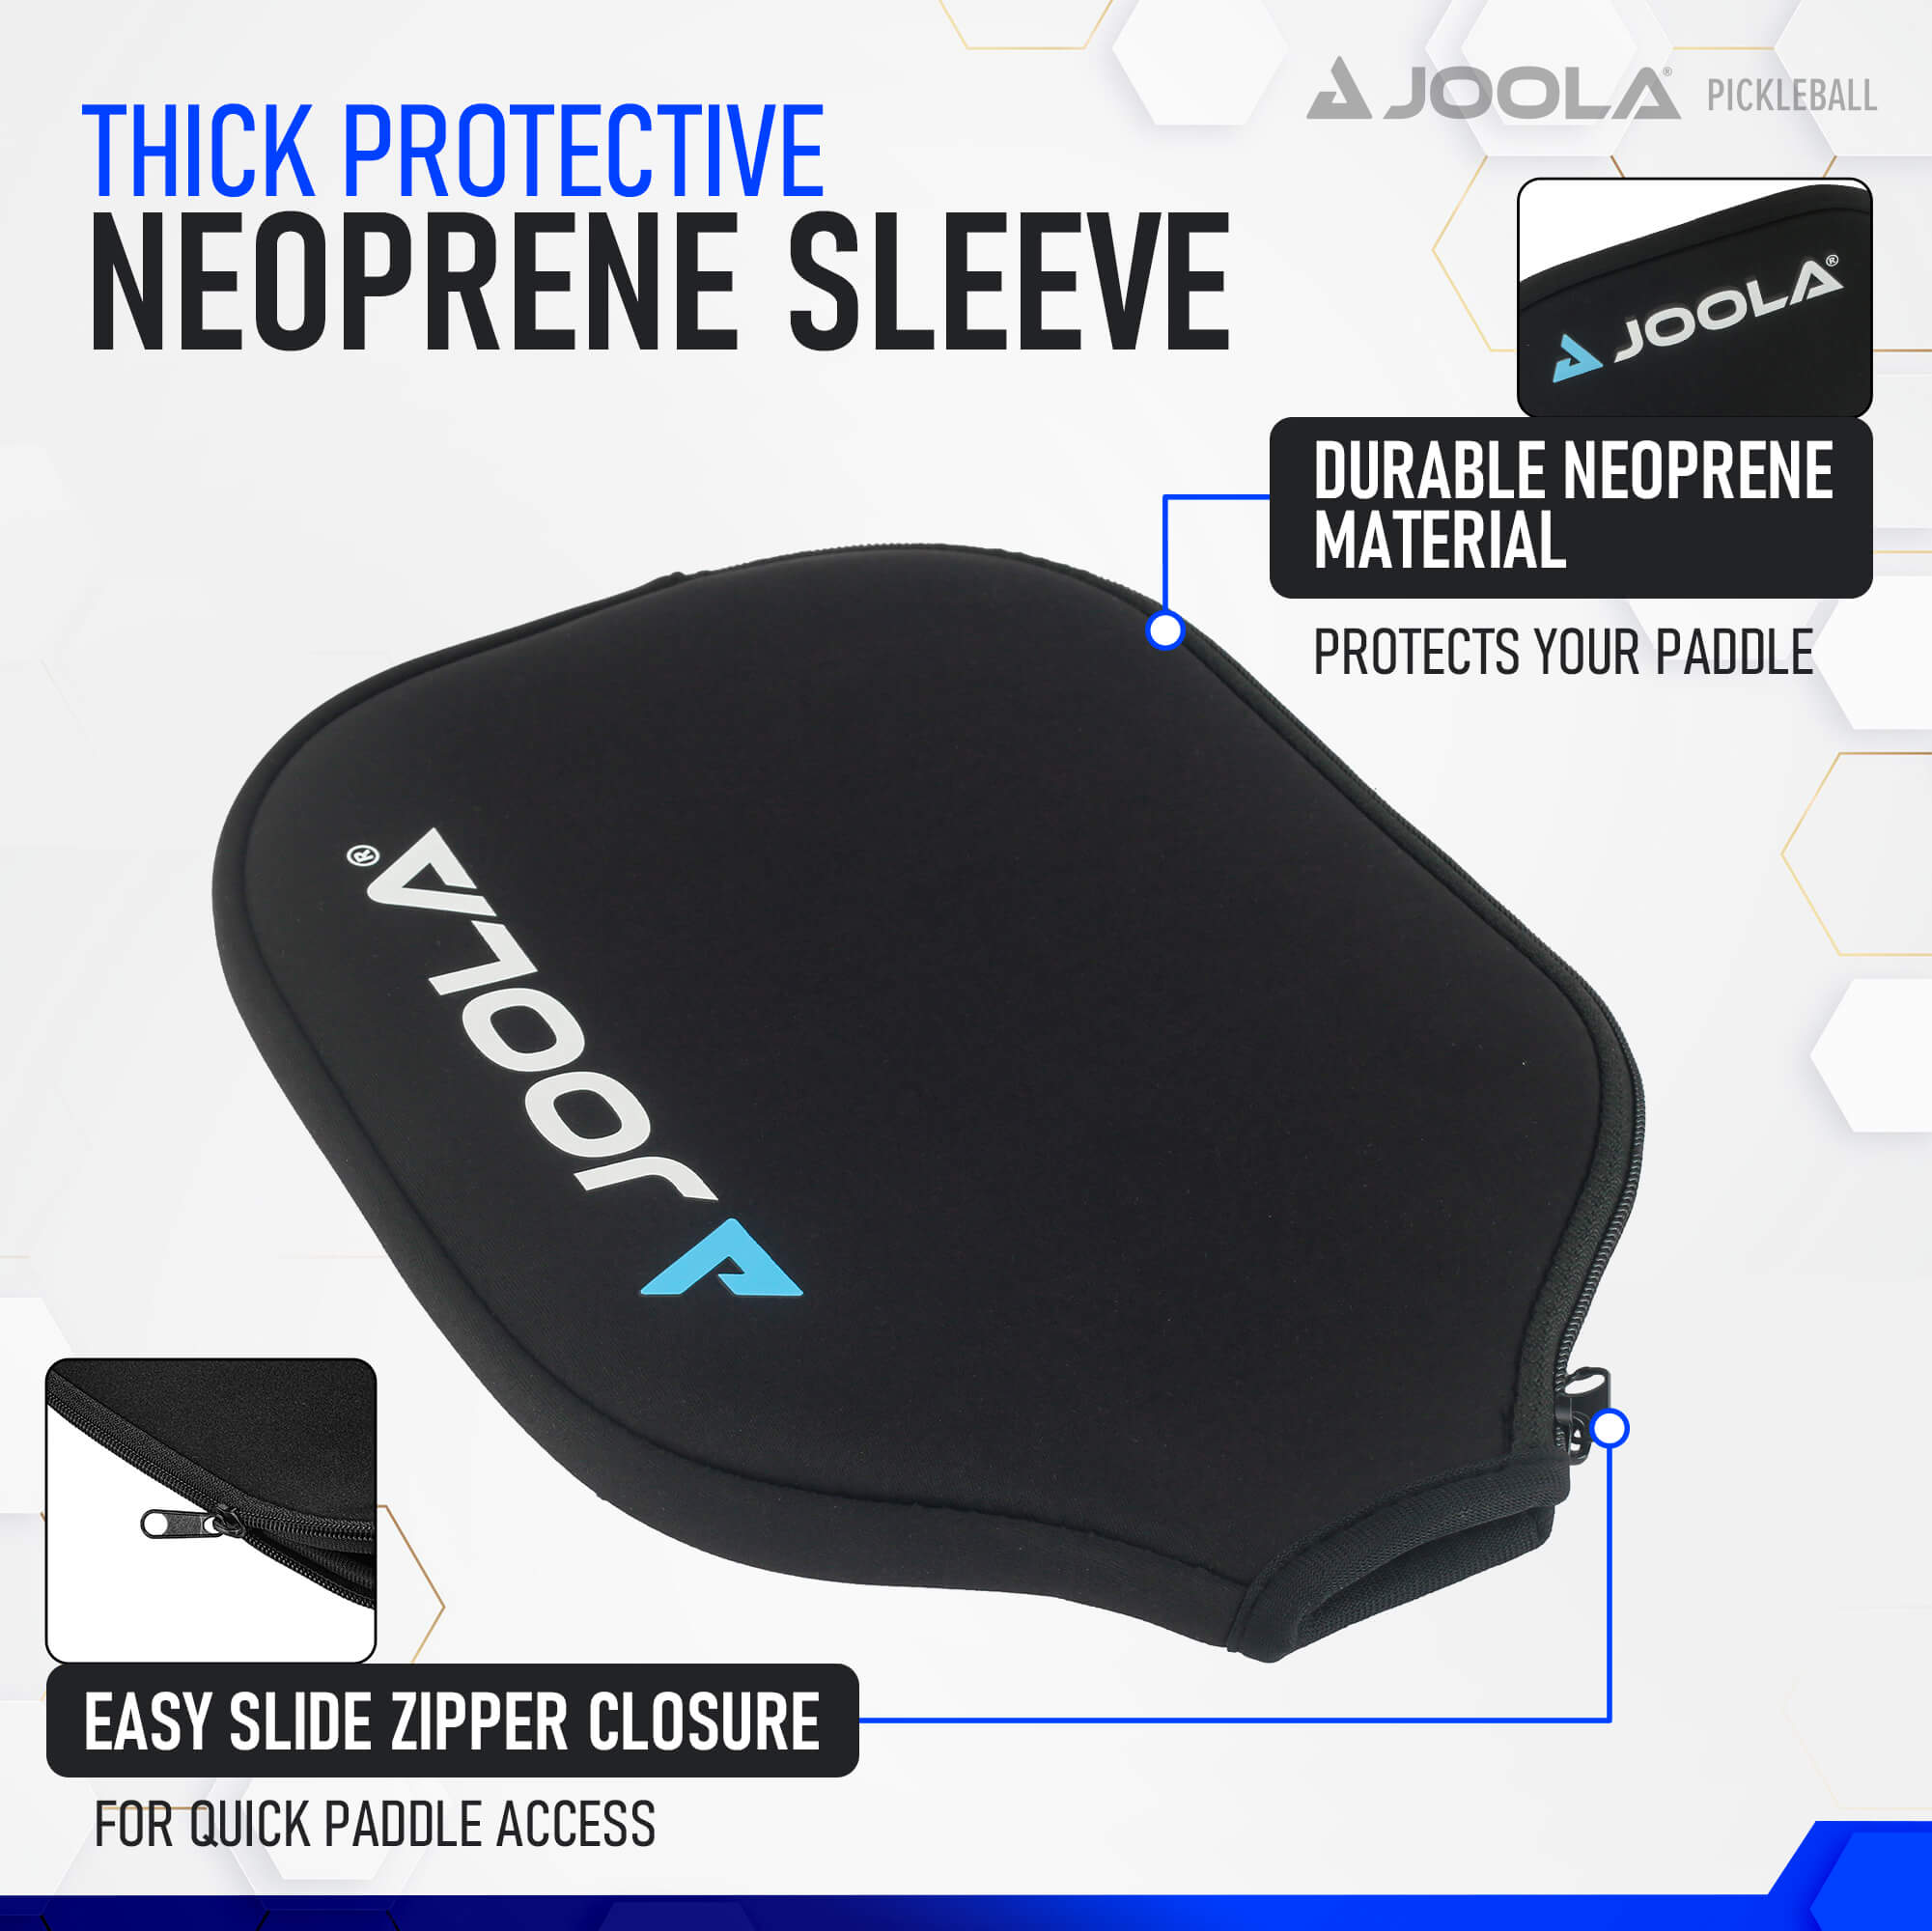 Infographic: "Thick protective neoprene sleeve. Durable neoprene material protects your paddle. Easy slide zipper closure for quick paddle access."